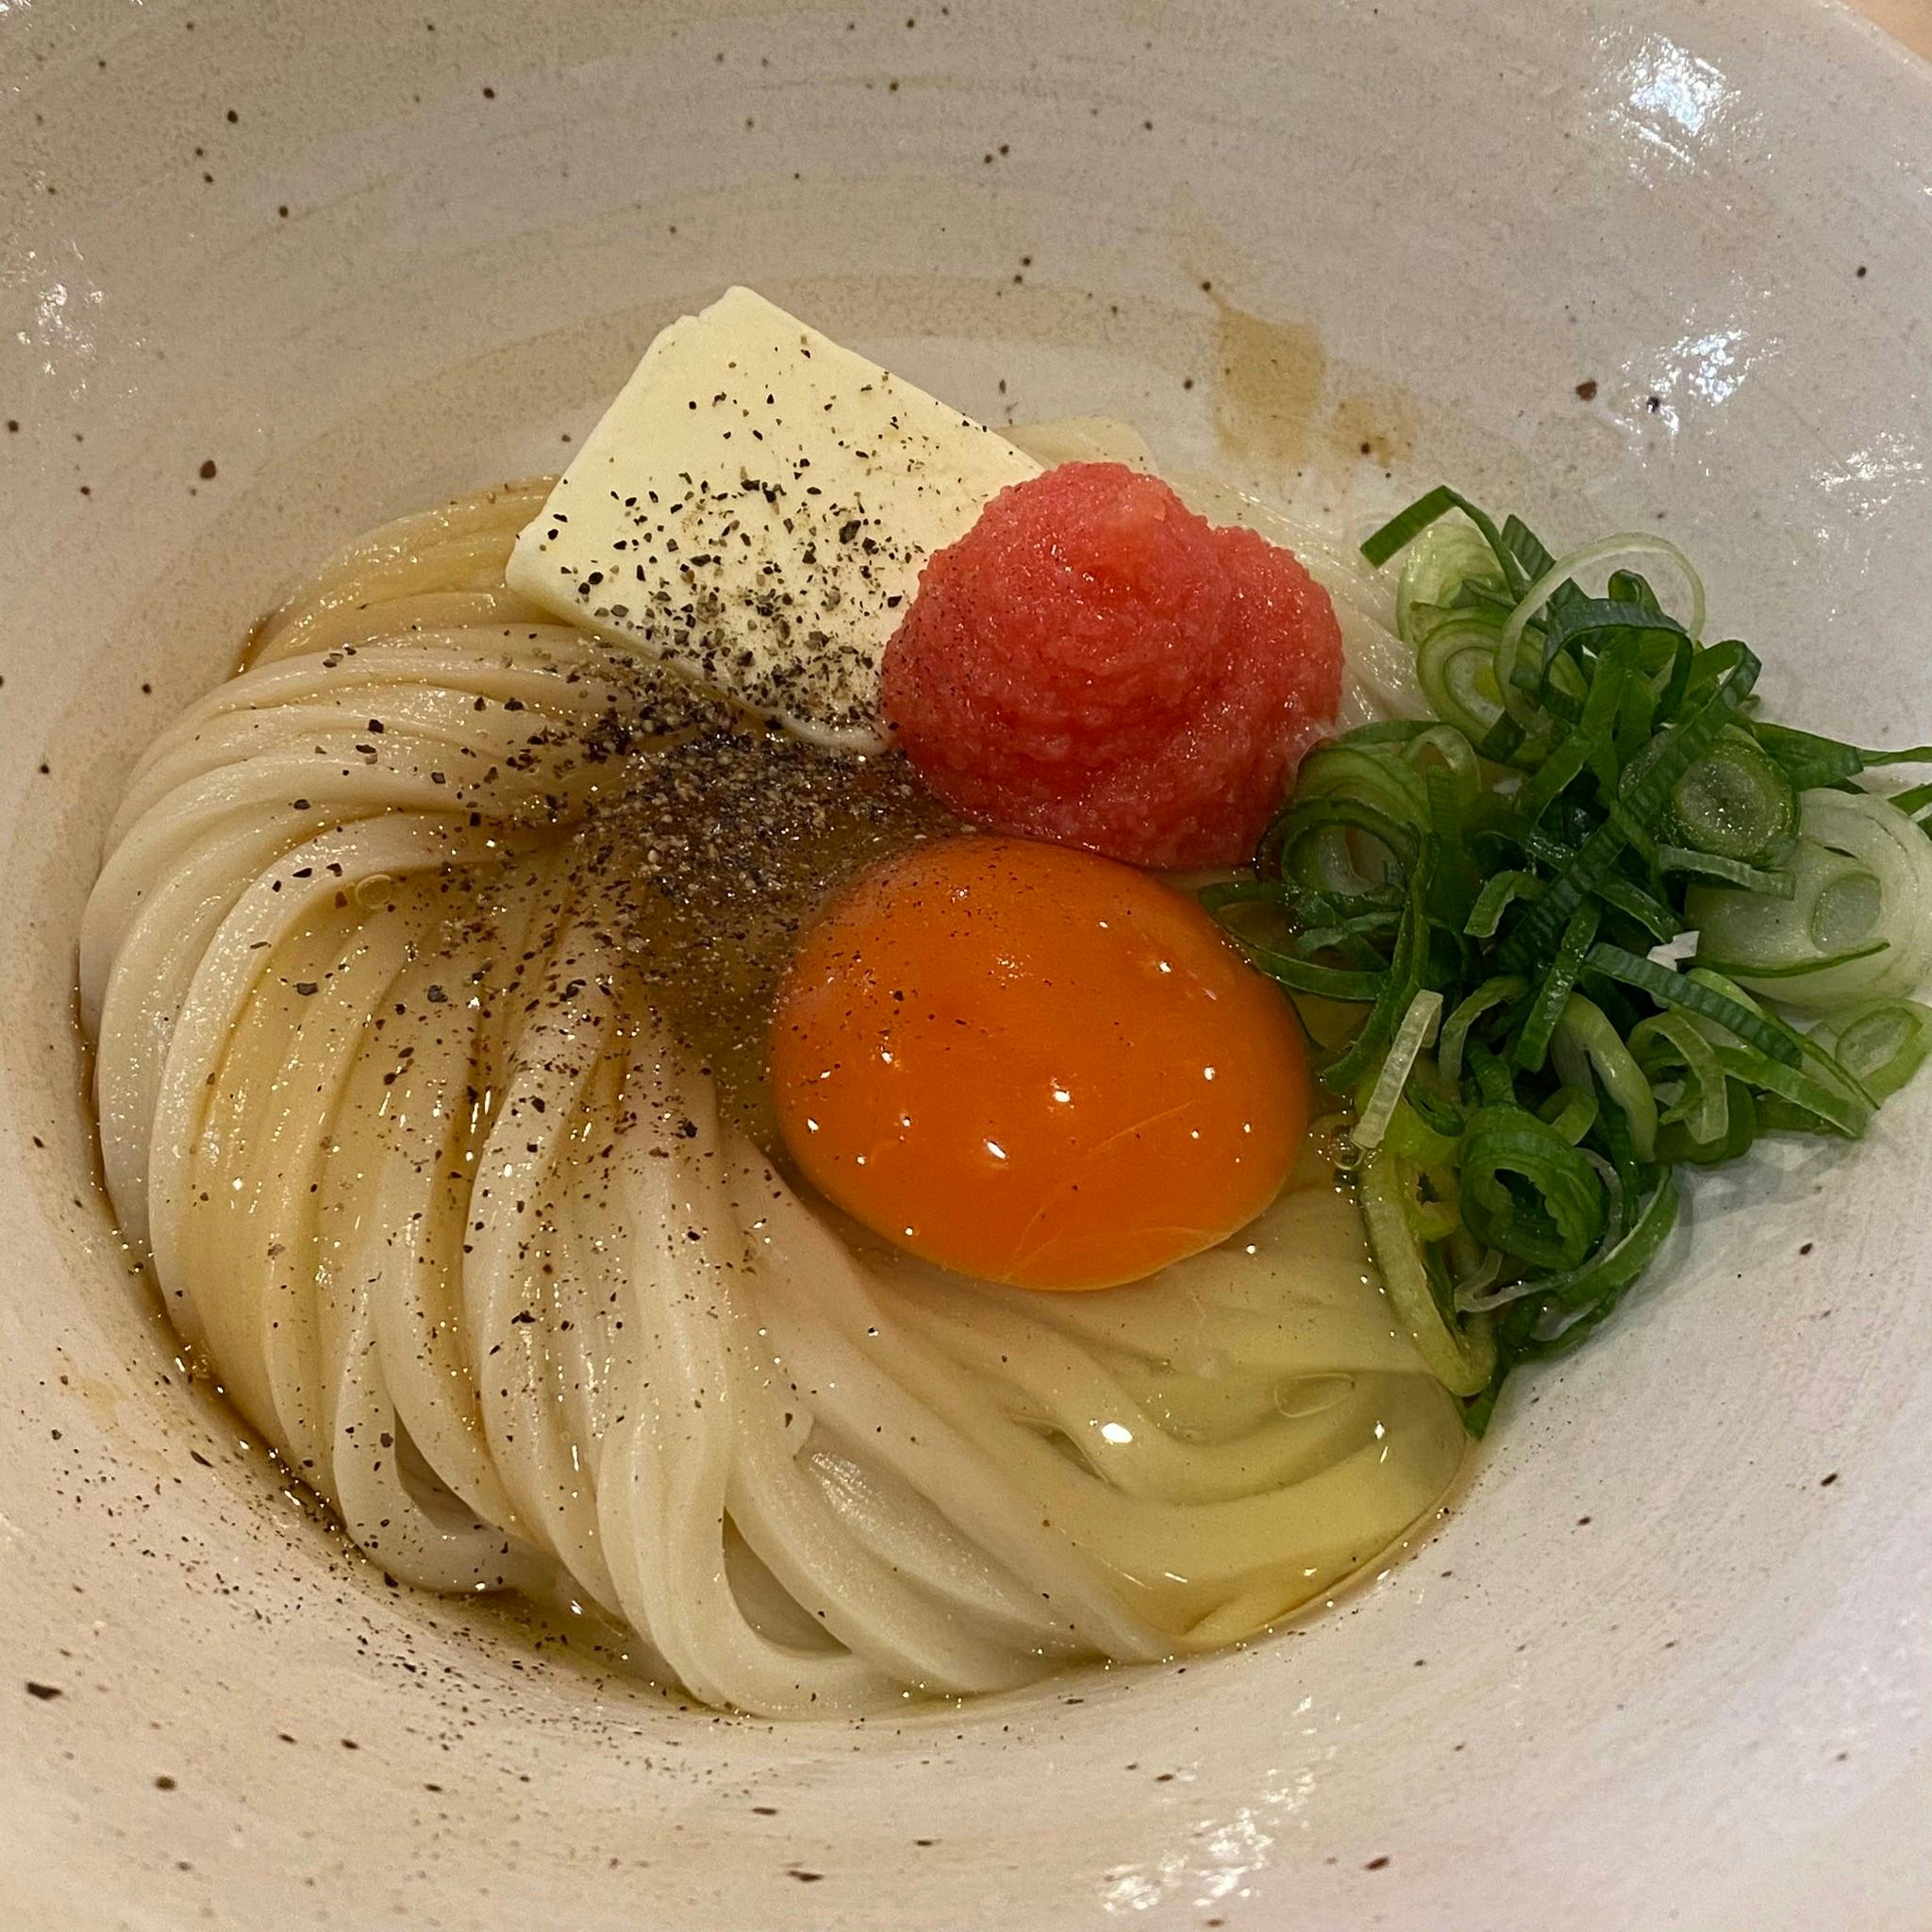 Mentaiko butter udon